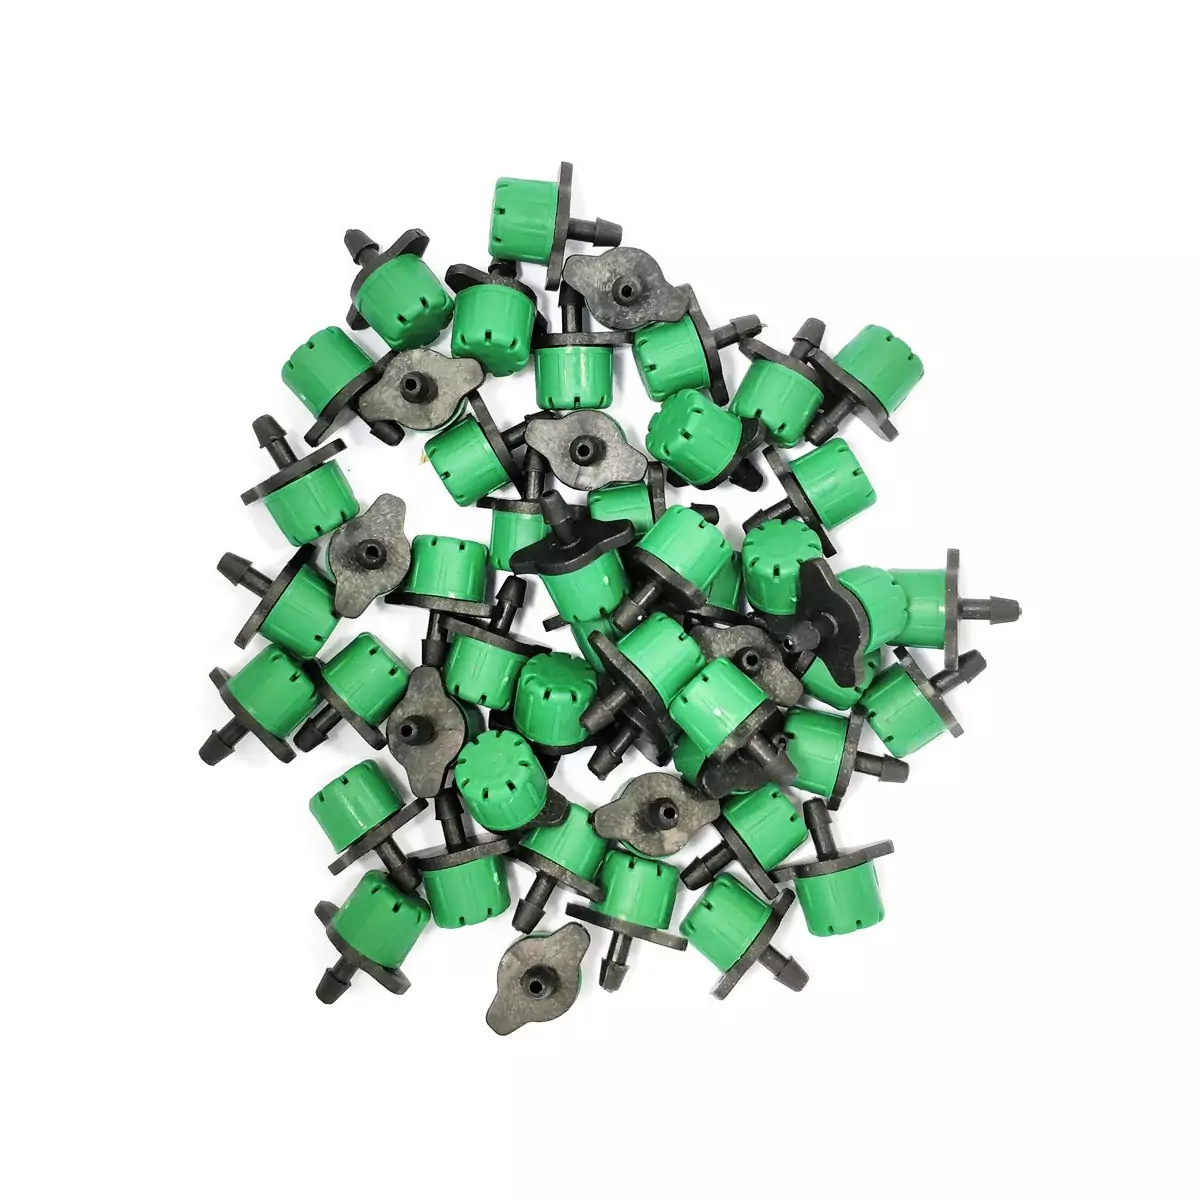 Lot of 50 green color drippers